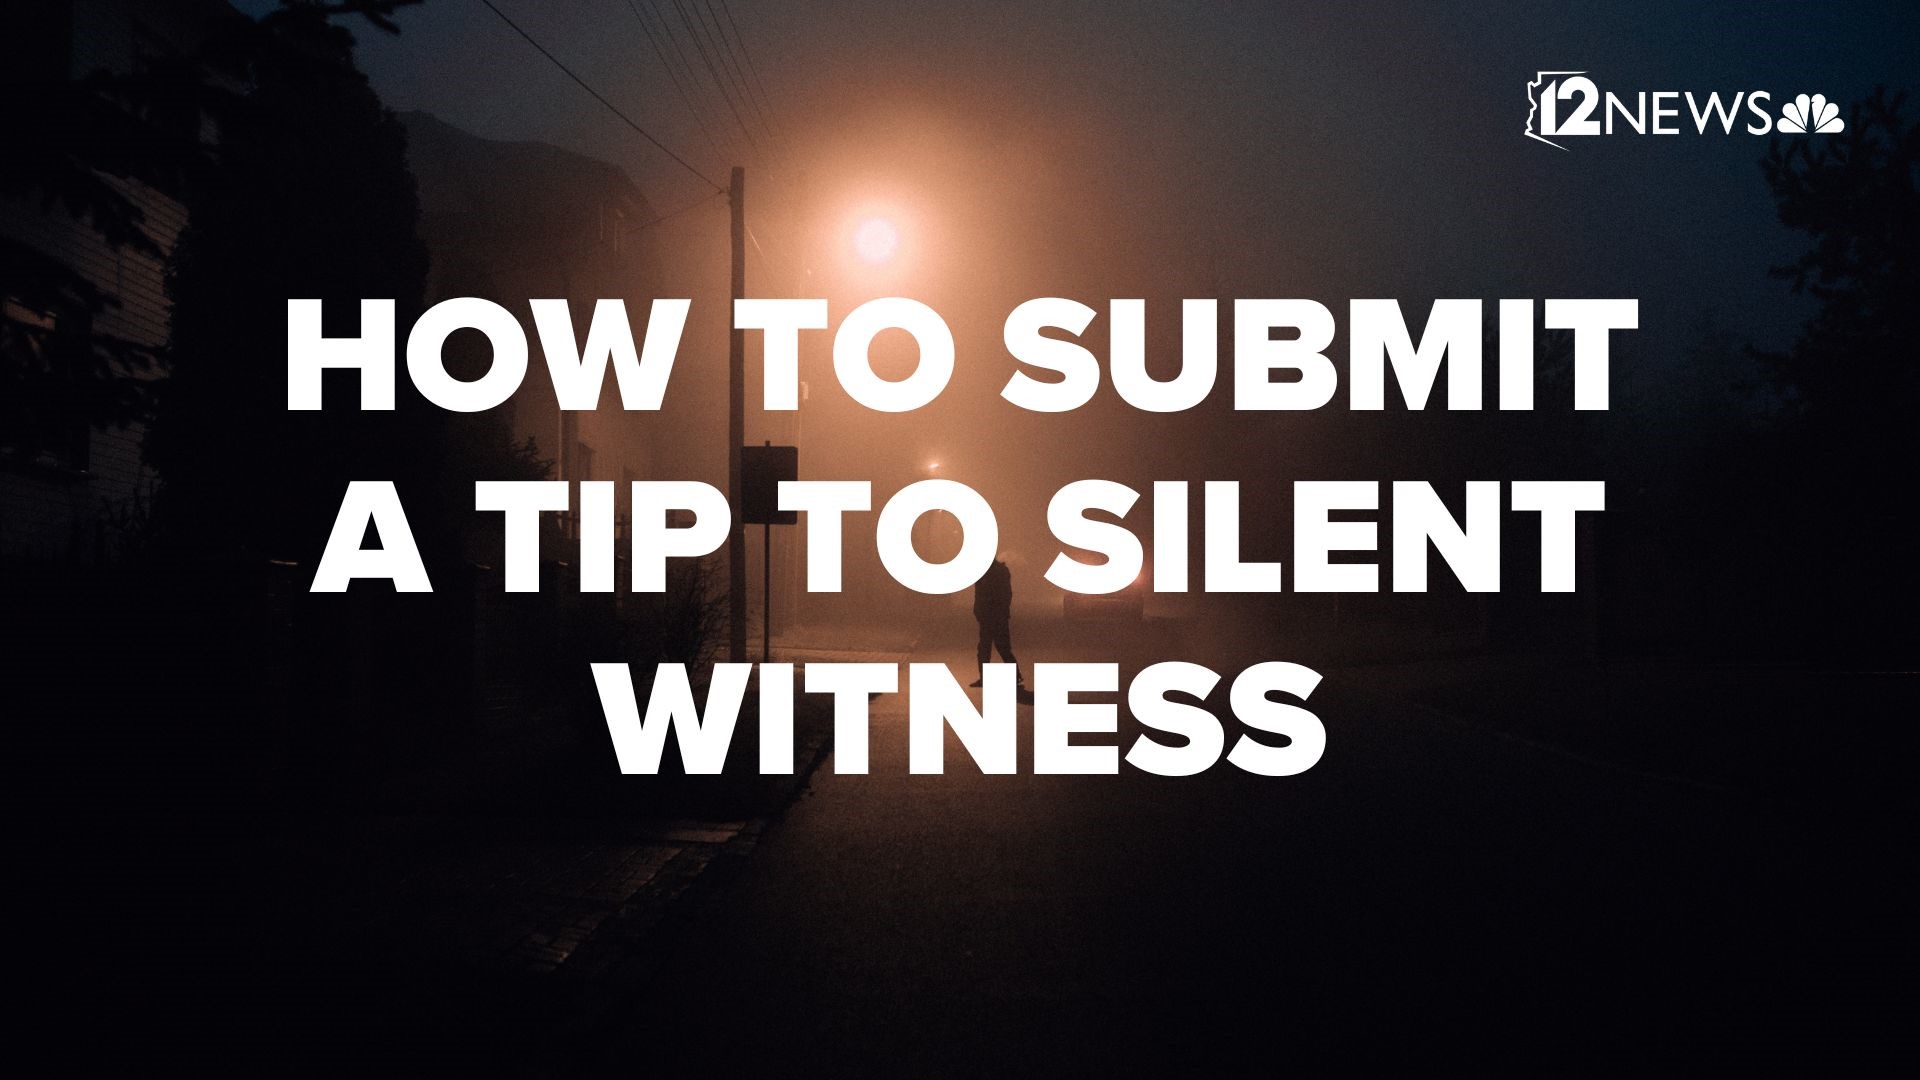 If you have information about a crime, here are some ways to submit a tip to the Silent Witness program.